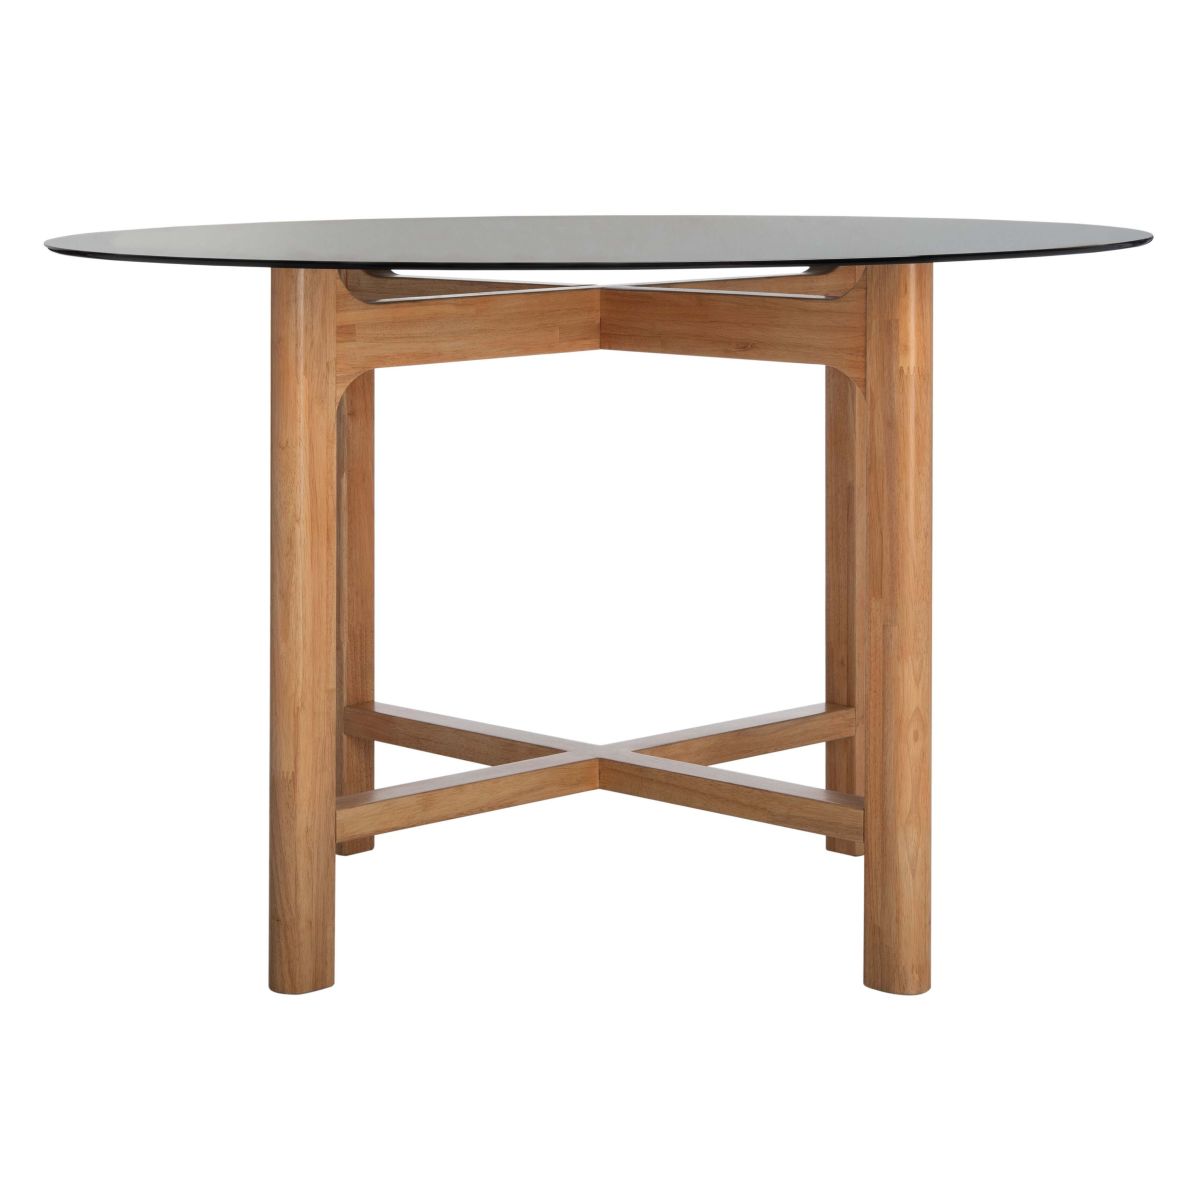 Safavieh Couture Ruthanne Round Glass Dining Table - Oak / Black